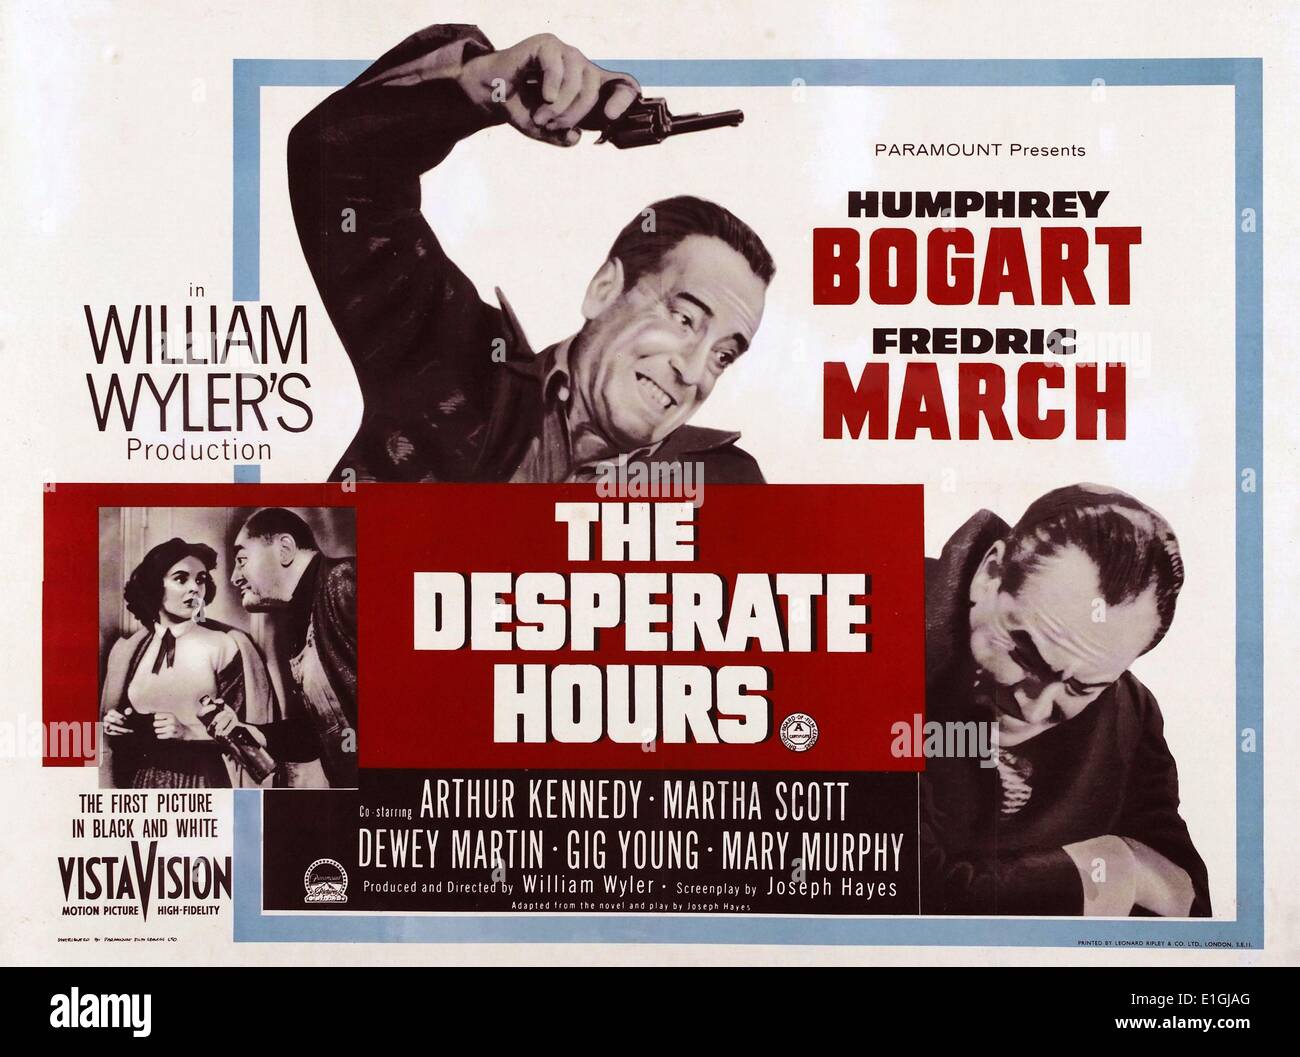 The Desperate Hours is a 1955 film from Paramount Pictures starring Humphrey Bogart and Fredric March. starring Humphrey Bogart, Frederick March, Arthur Kennedy, Martha Scott, Dewy Martin, Gig Young and Mary Murphy Stock Photo